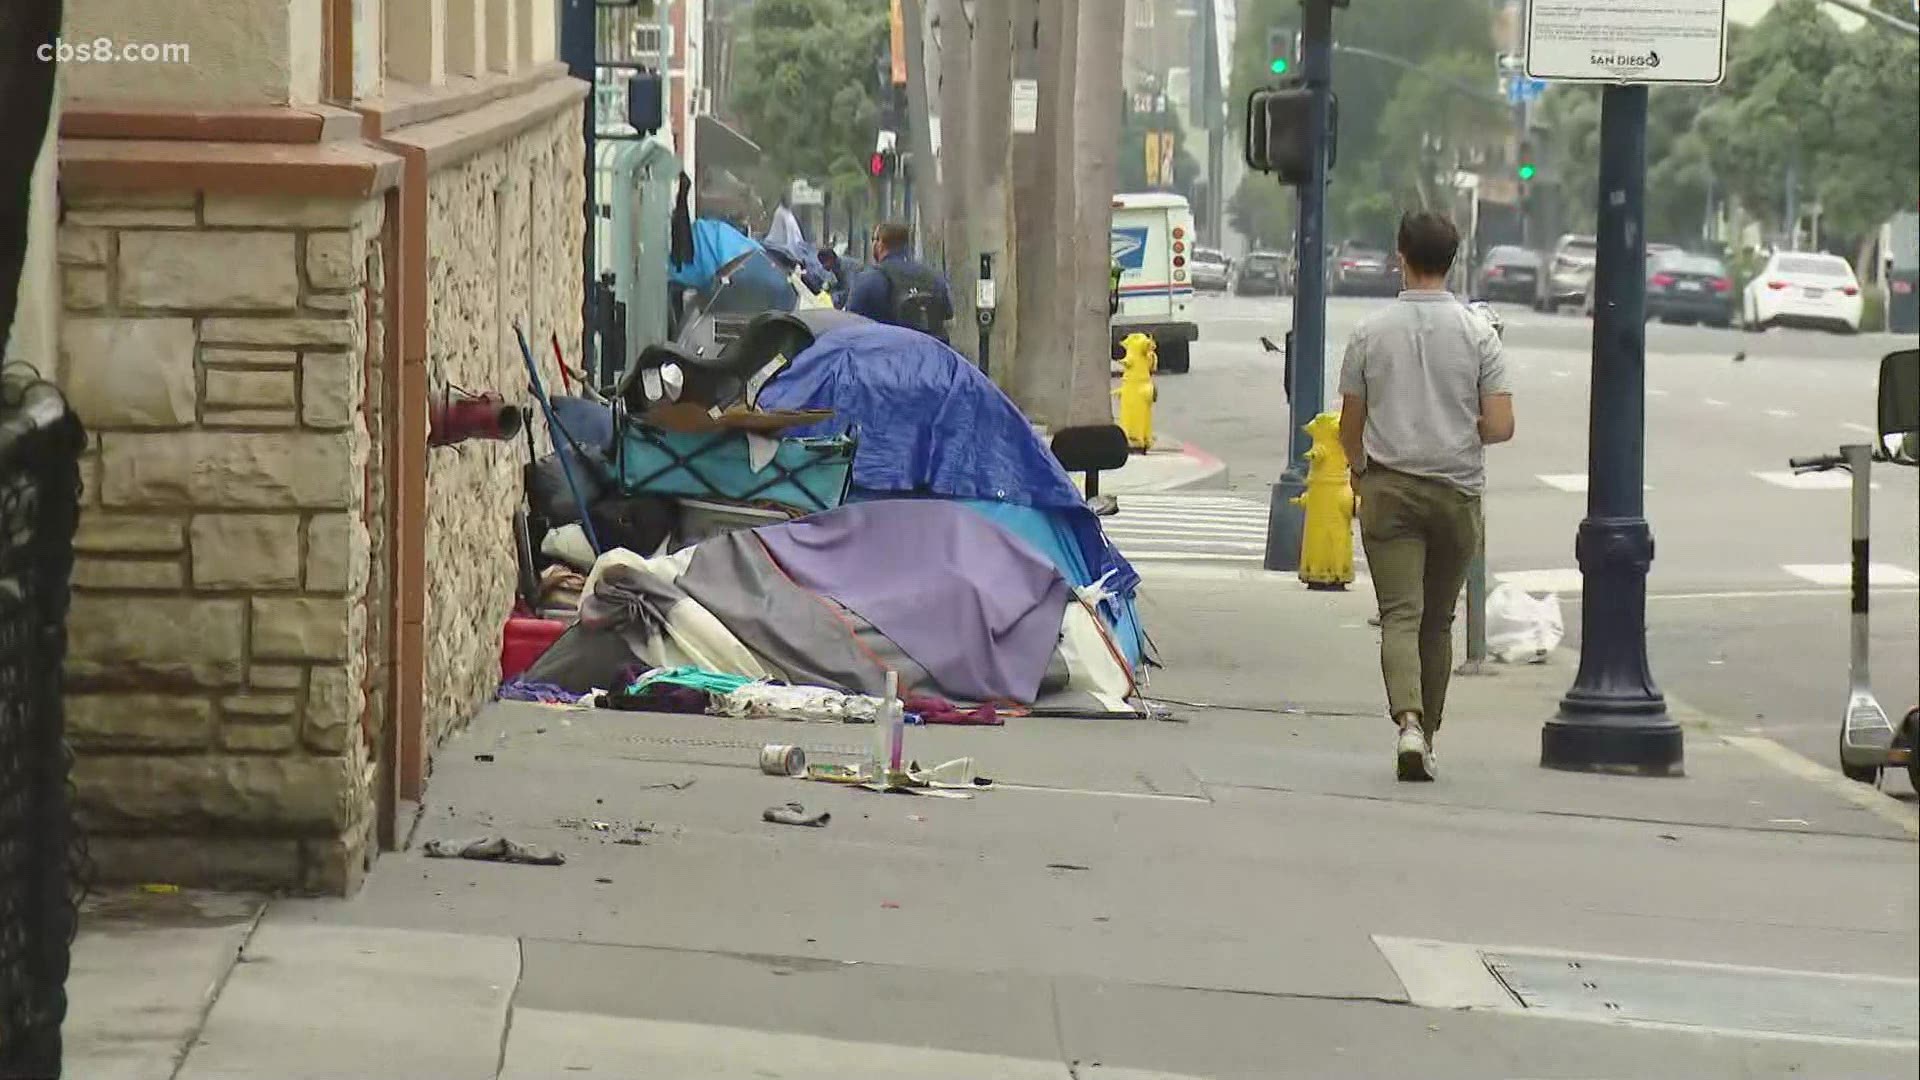 Recently, Mayor Todd Gloria earmarked more than $10 million in the newest city budget for immediate action to “combat the homeless crisis.”